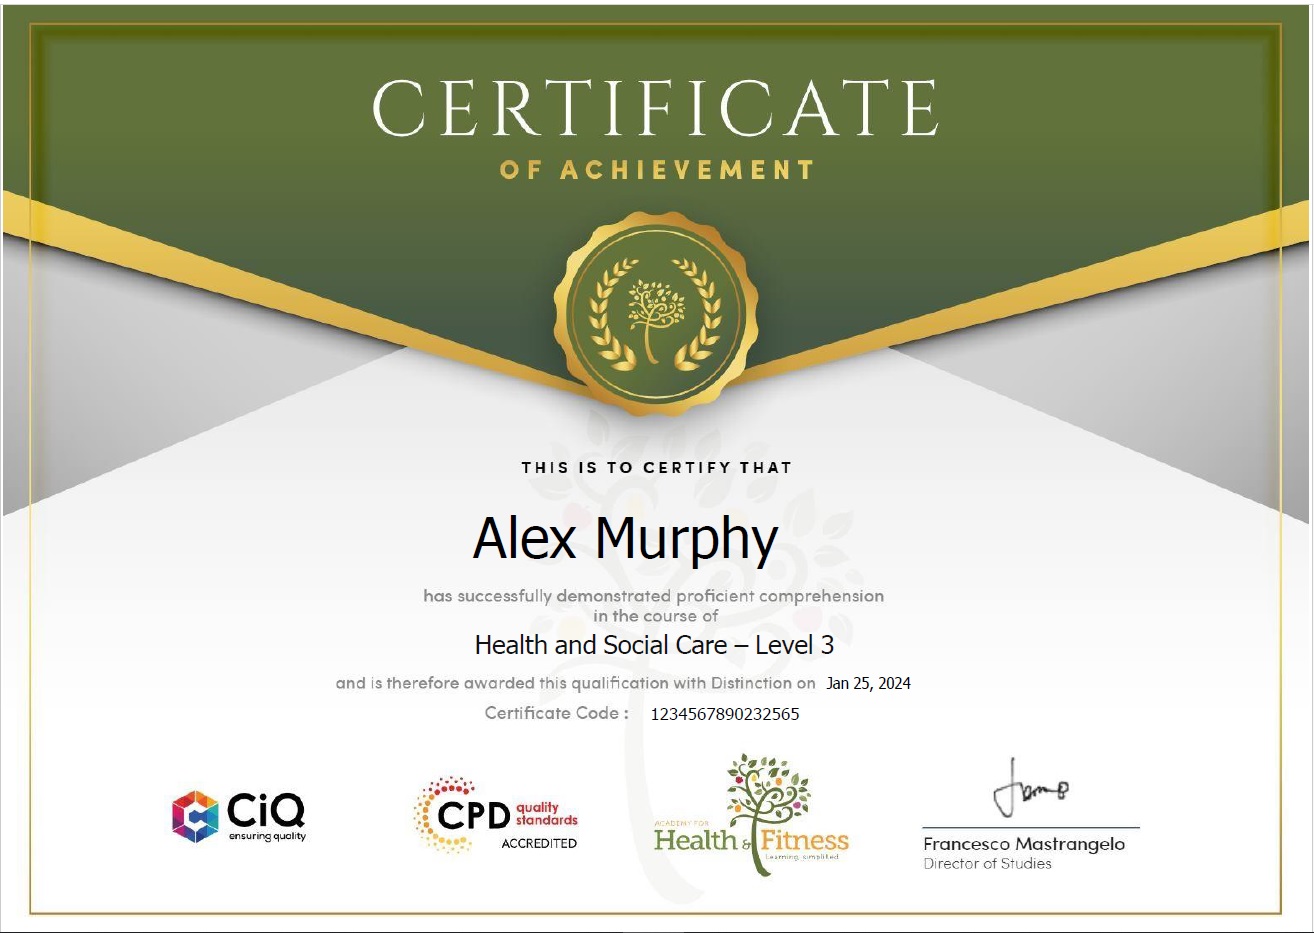 Academy for Health & Fitness sample certificate